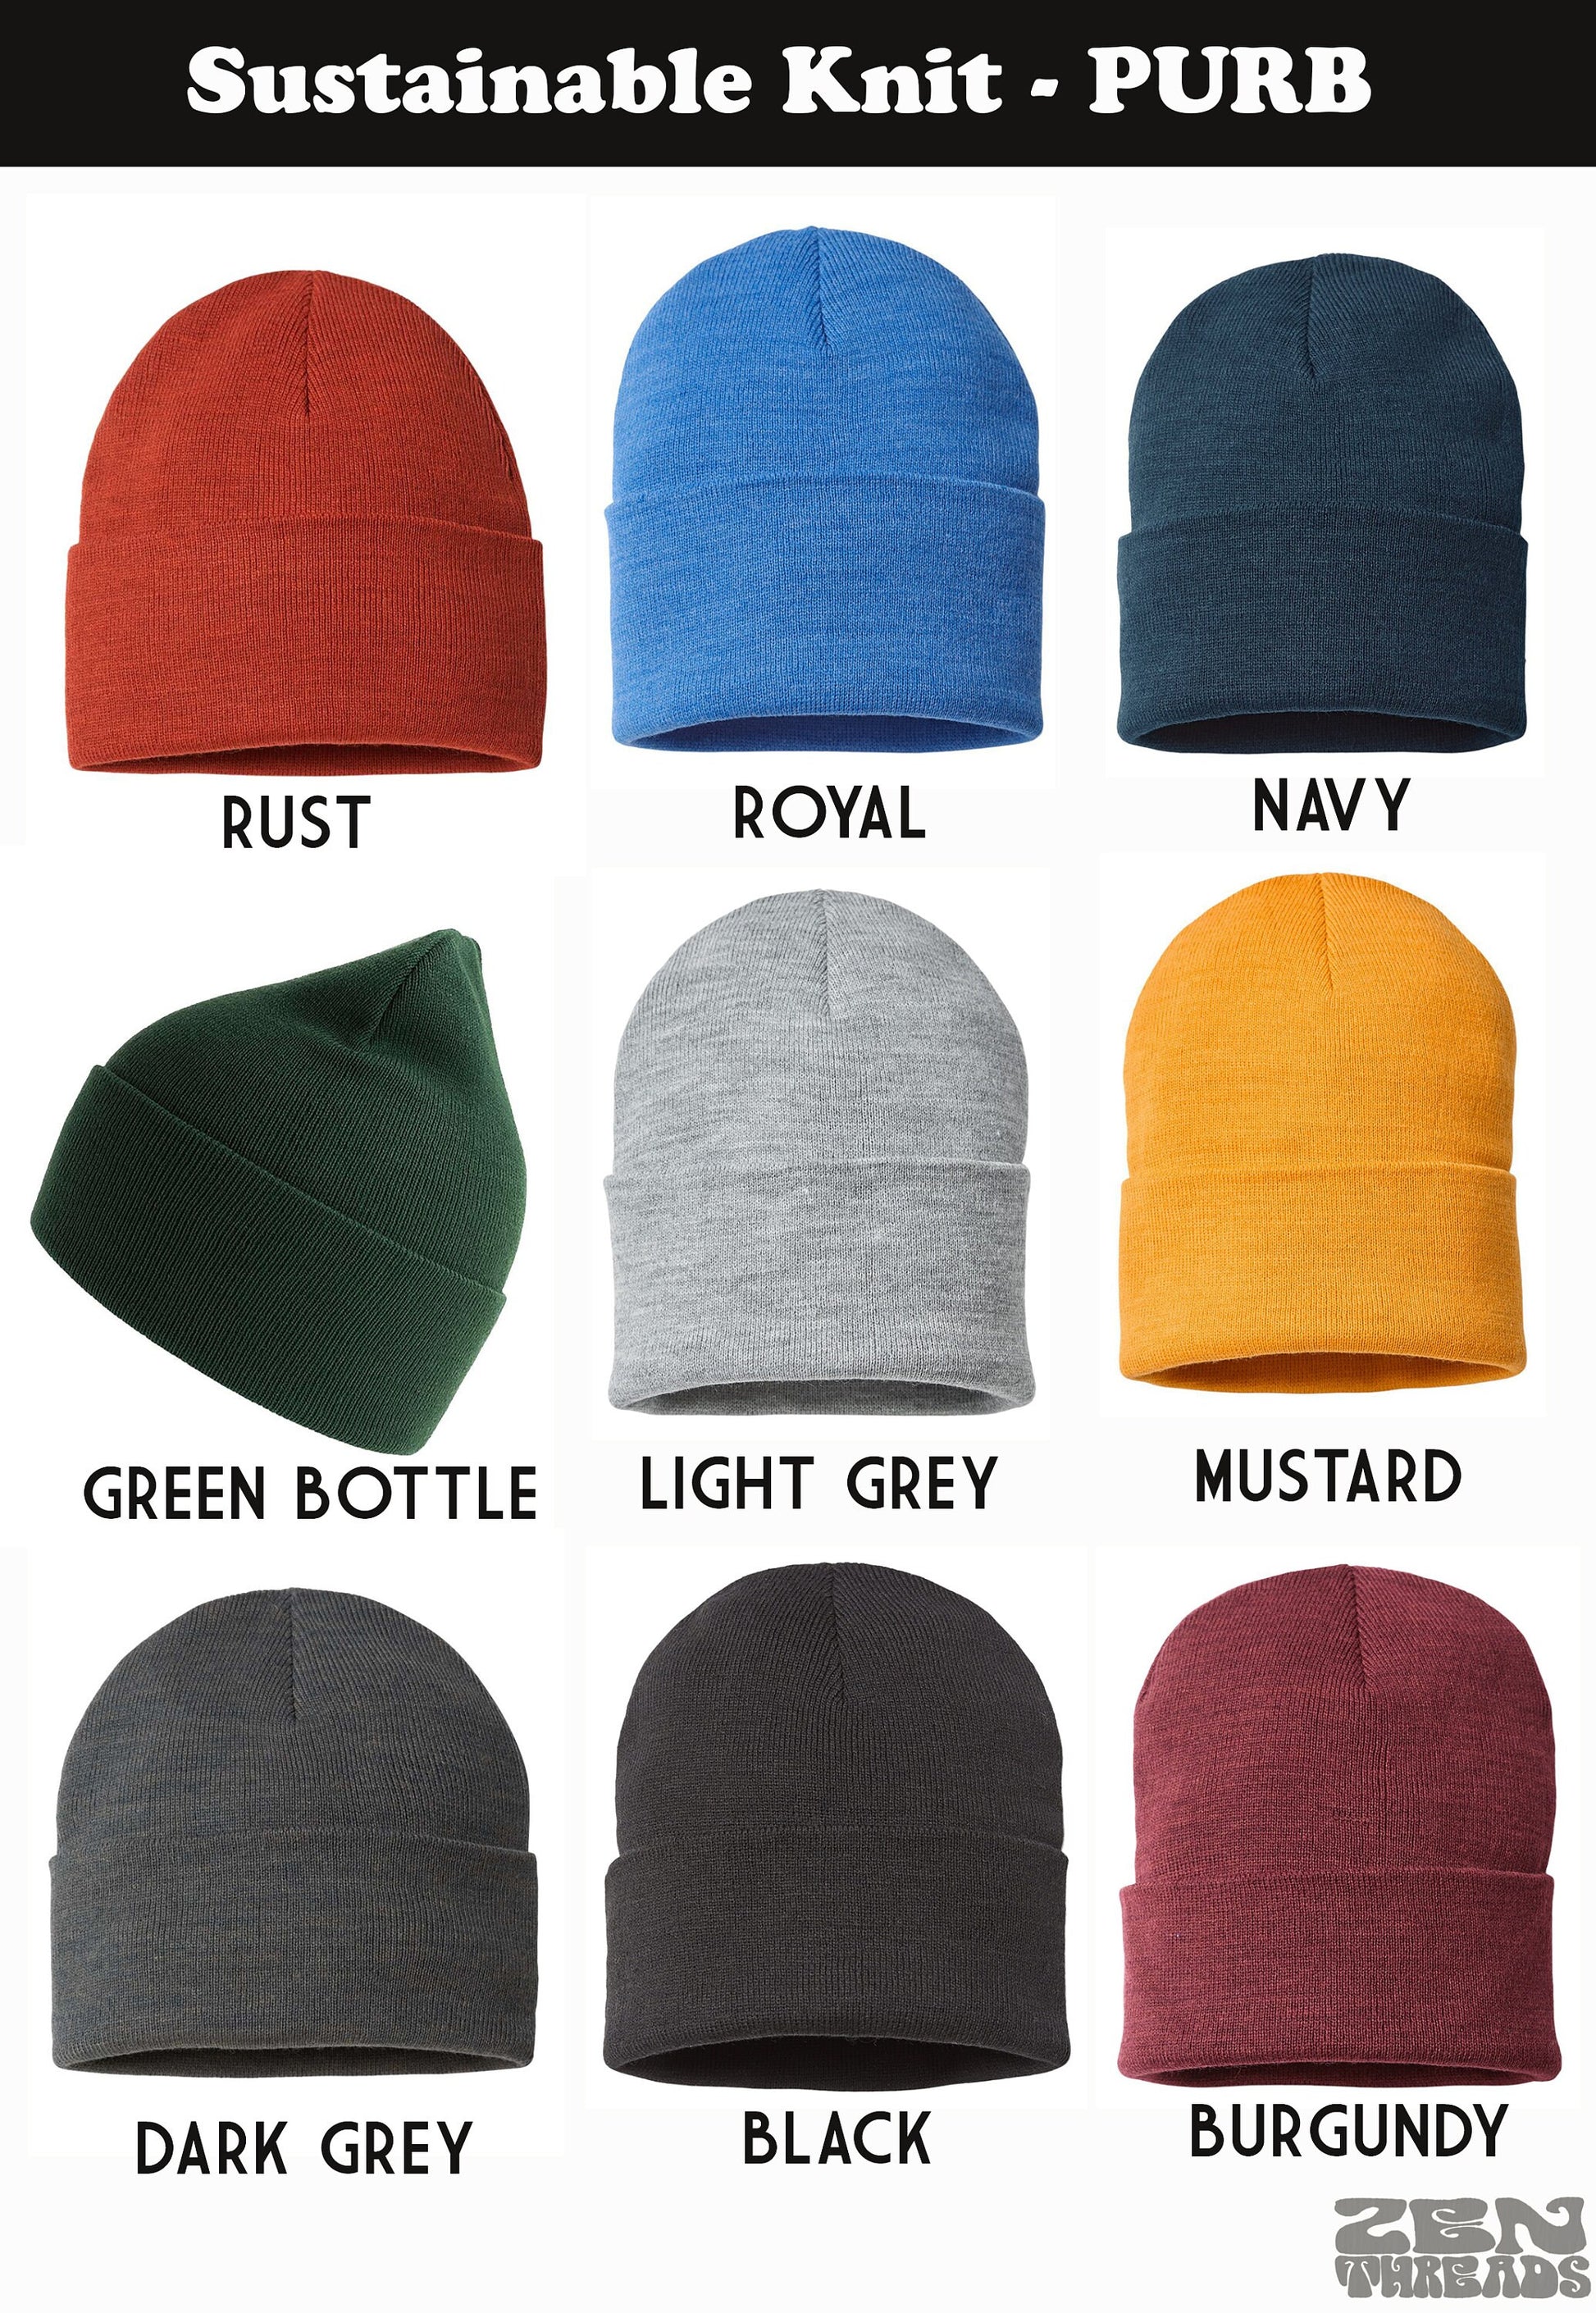 Sustainable CUSTOM PATCH Beanie Initials Leather leatherette vegan laser engraved customized monogram winter hat logo swag rivet tag hat